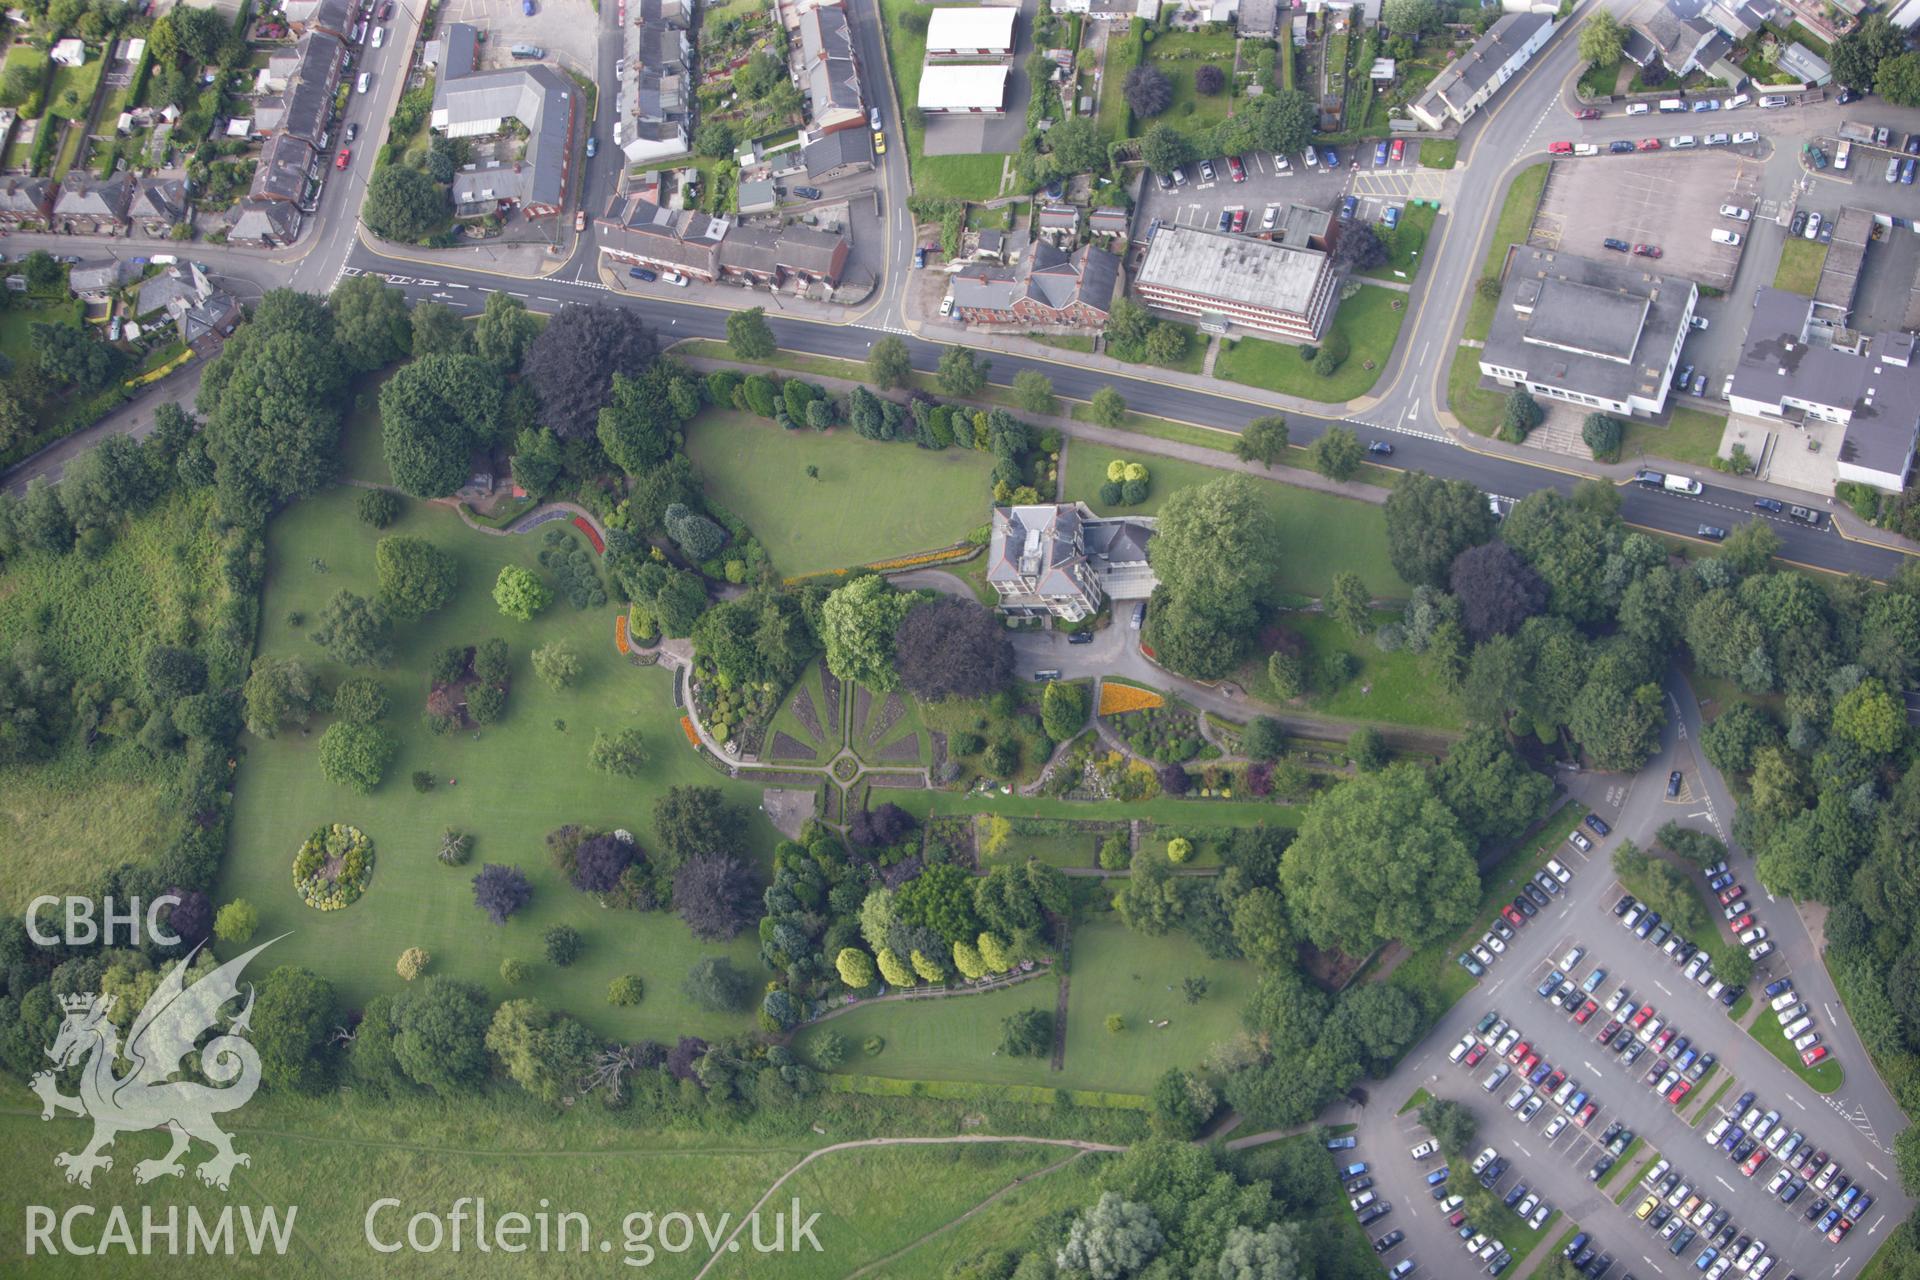 RCAHMW colour oblique aerial photograph of Linda Vista Gardens, Abergavenny. Taken on 23 July 2009 by Toby Driver